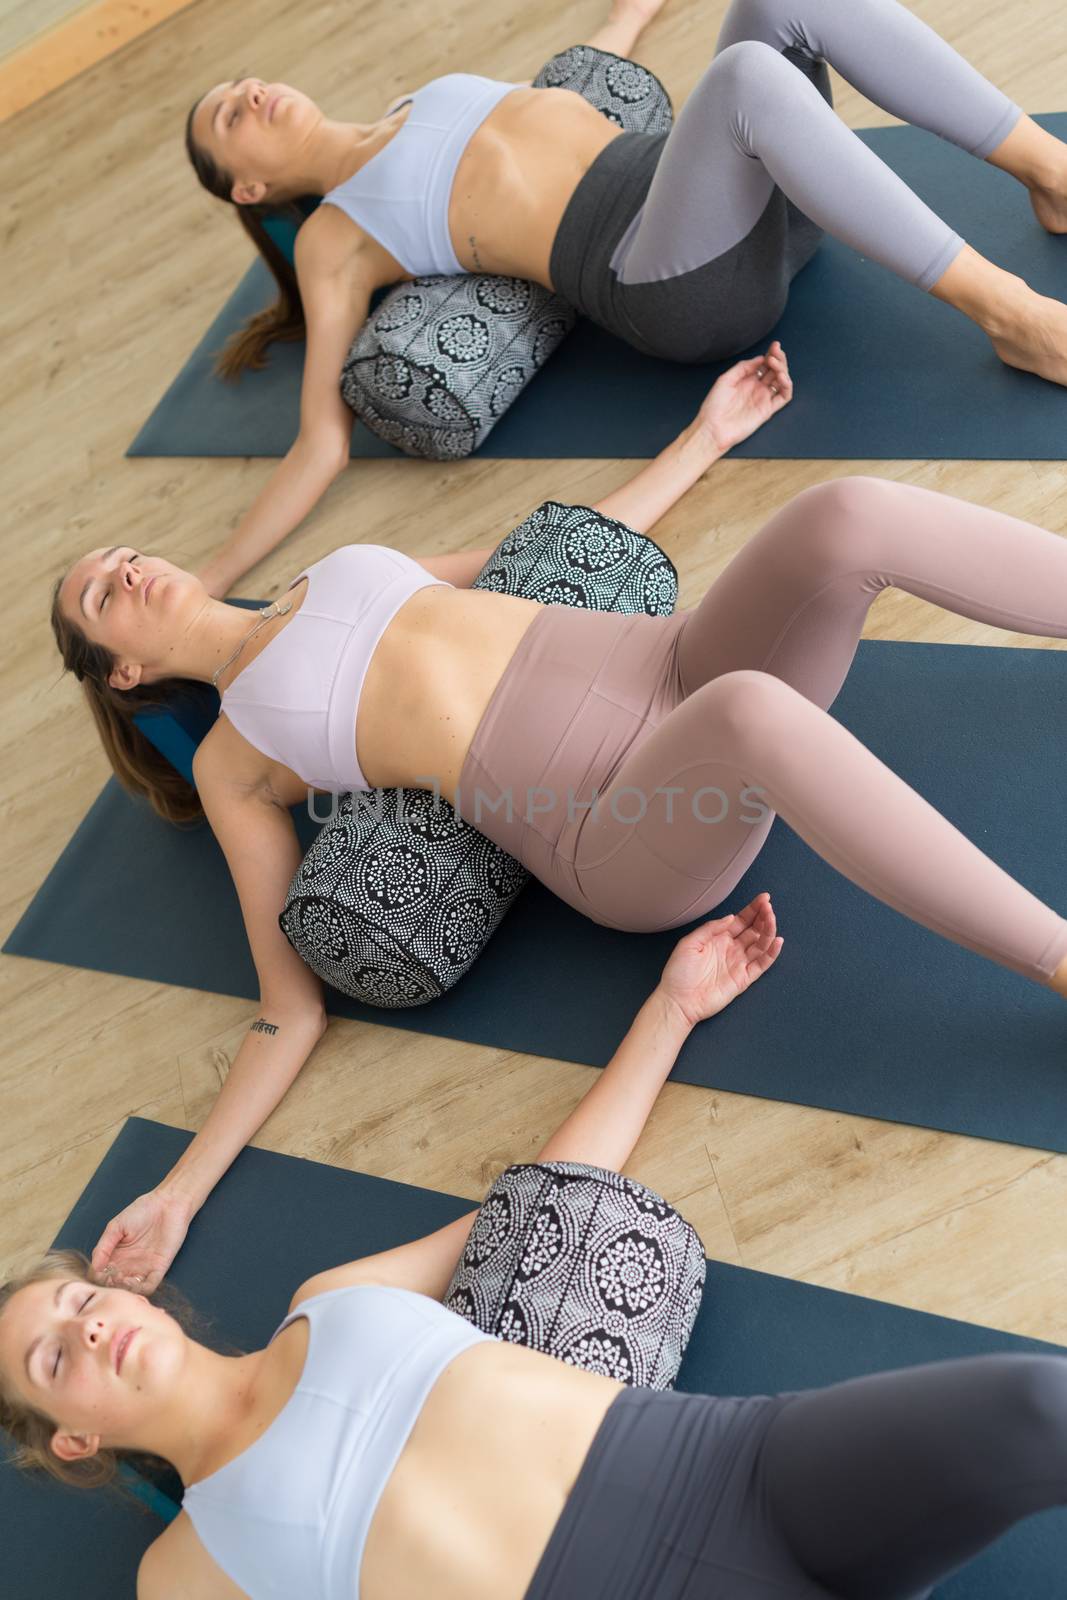 Restorative yoga with a bolster. Group of three young sporty attractive women in yoga studio, lying on bolster cushion, stretching and relaxing during restorative yoga. Healthy active lifestyle by kasto